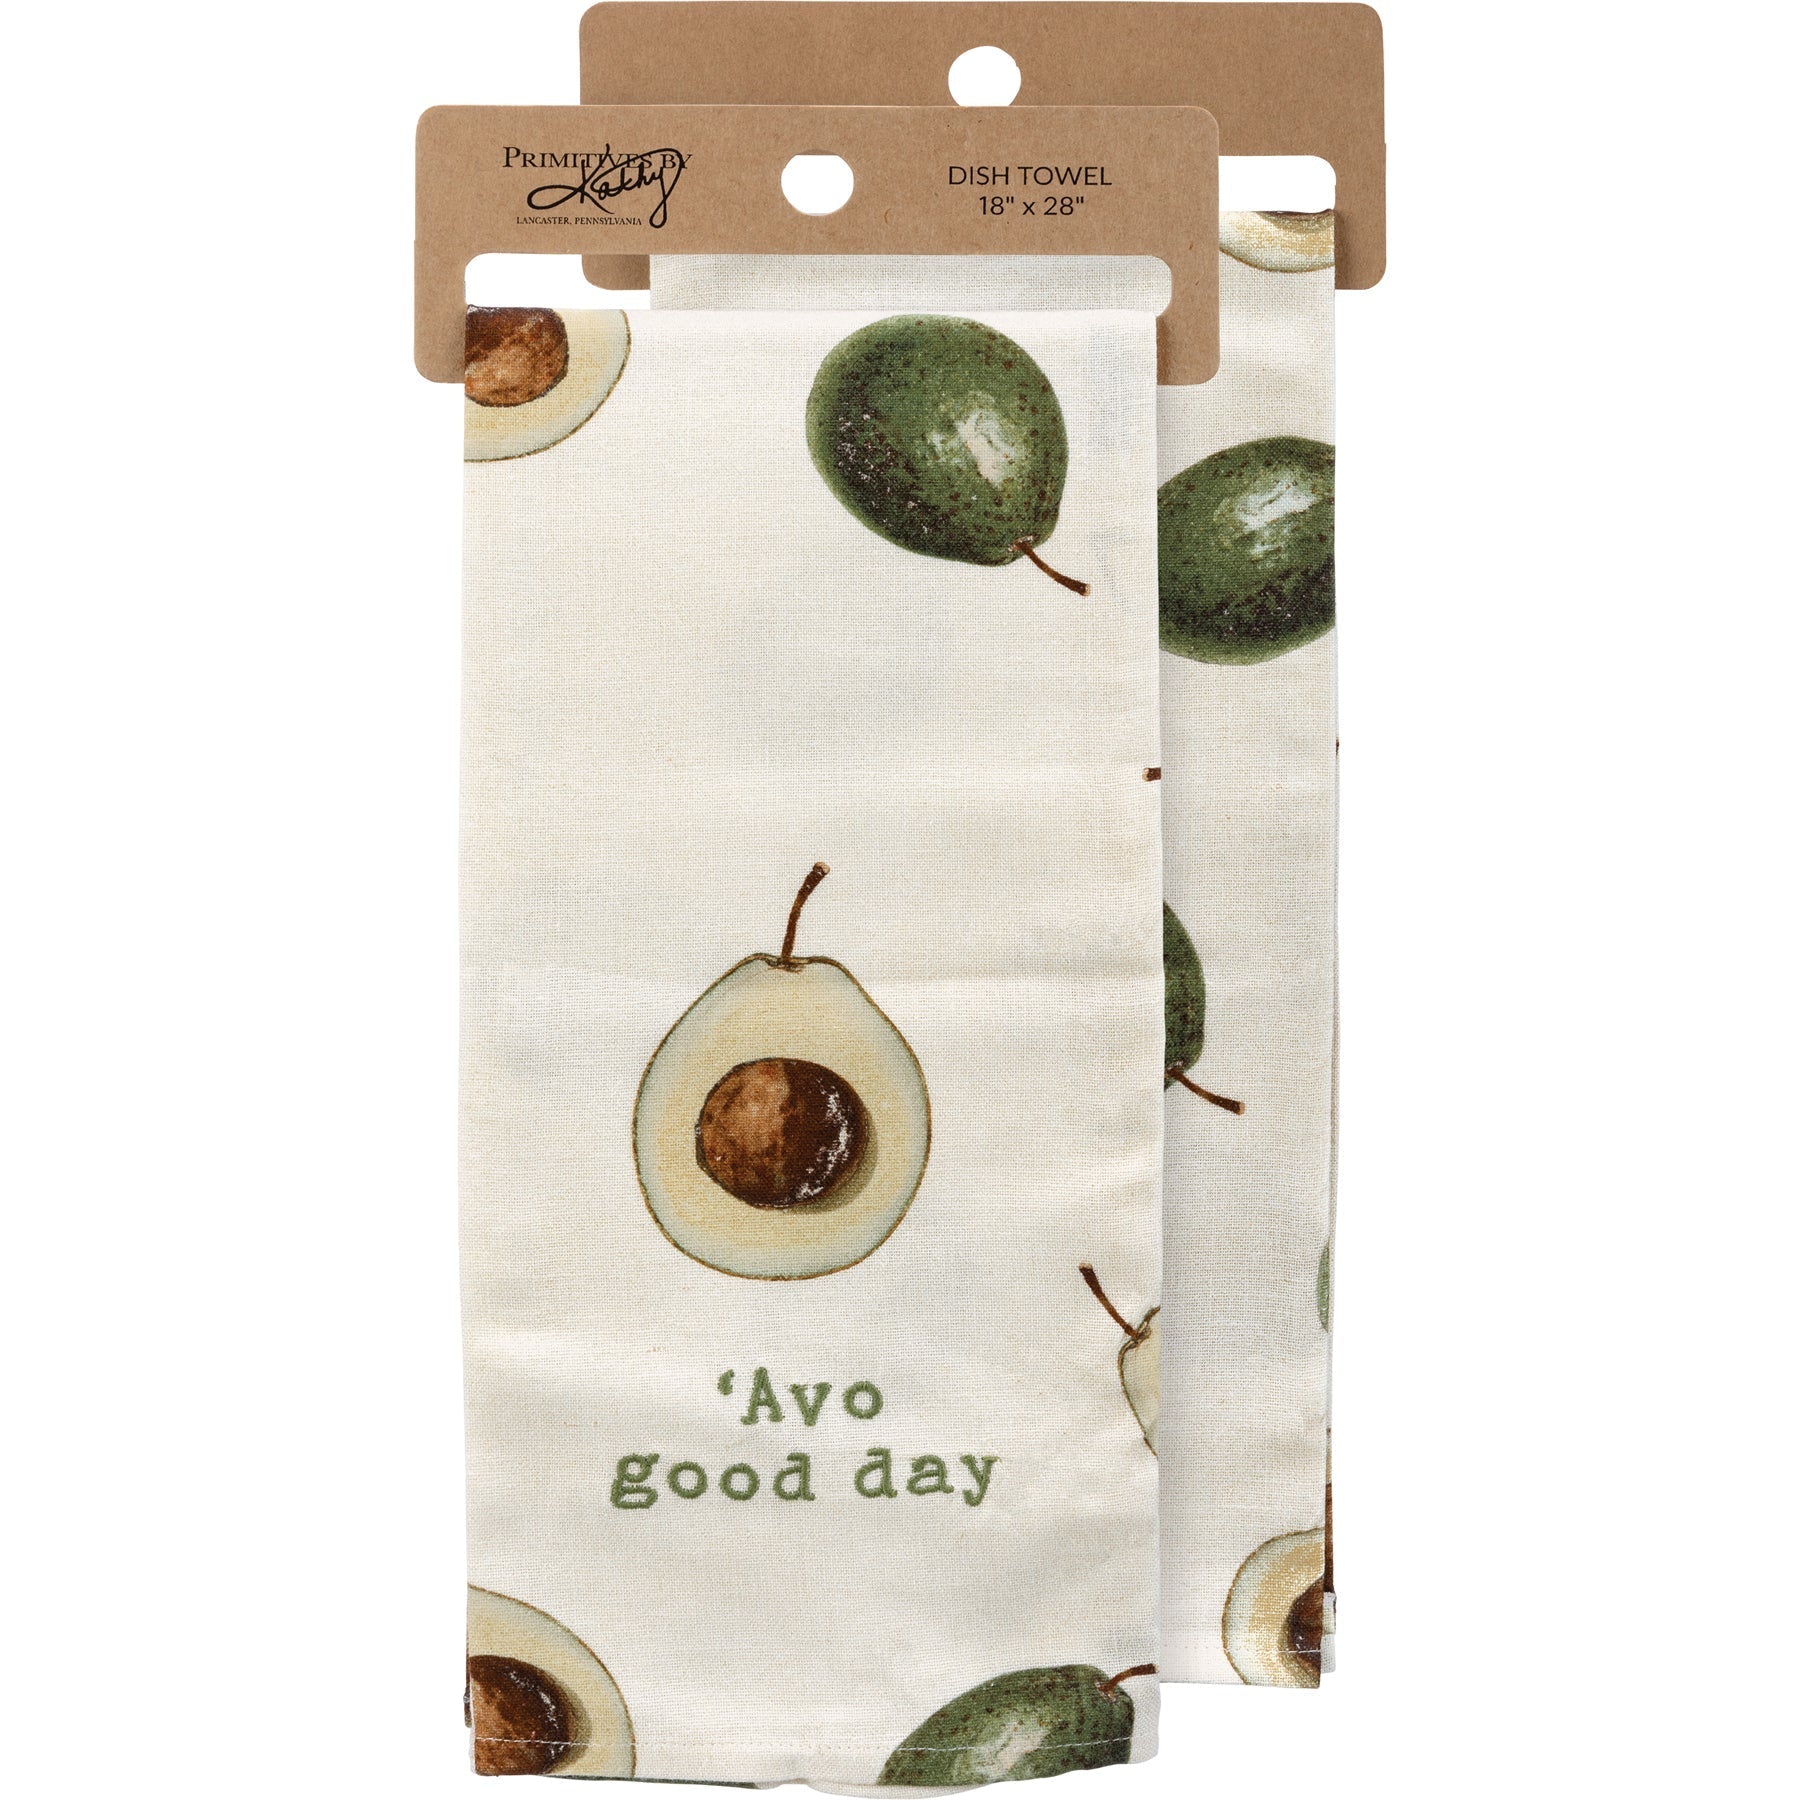 'Avo Good Day Funny Snarky Dish Cloth Towel | Cotton Linen | Embroidered Text | 18" x 28"